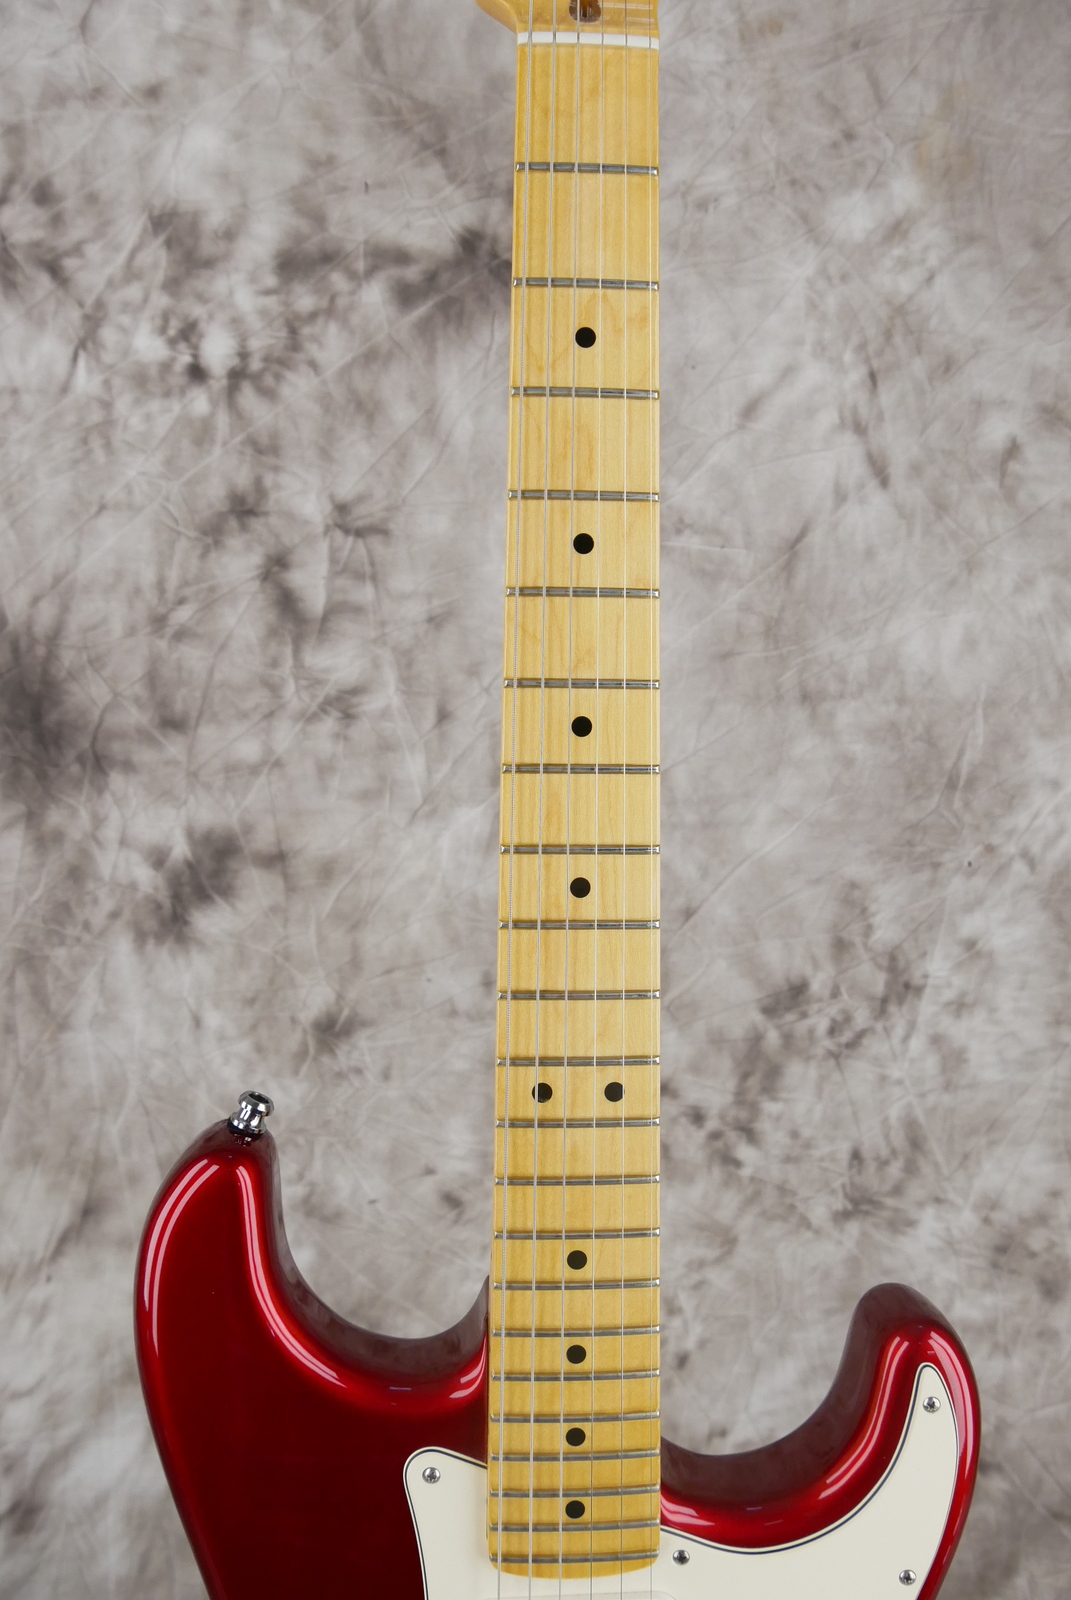 Fender_Stratocaster_USA_built_from_parts_candy_apple_red_2015-011.JPG